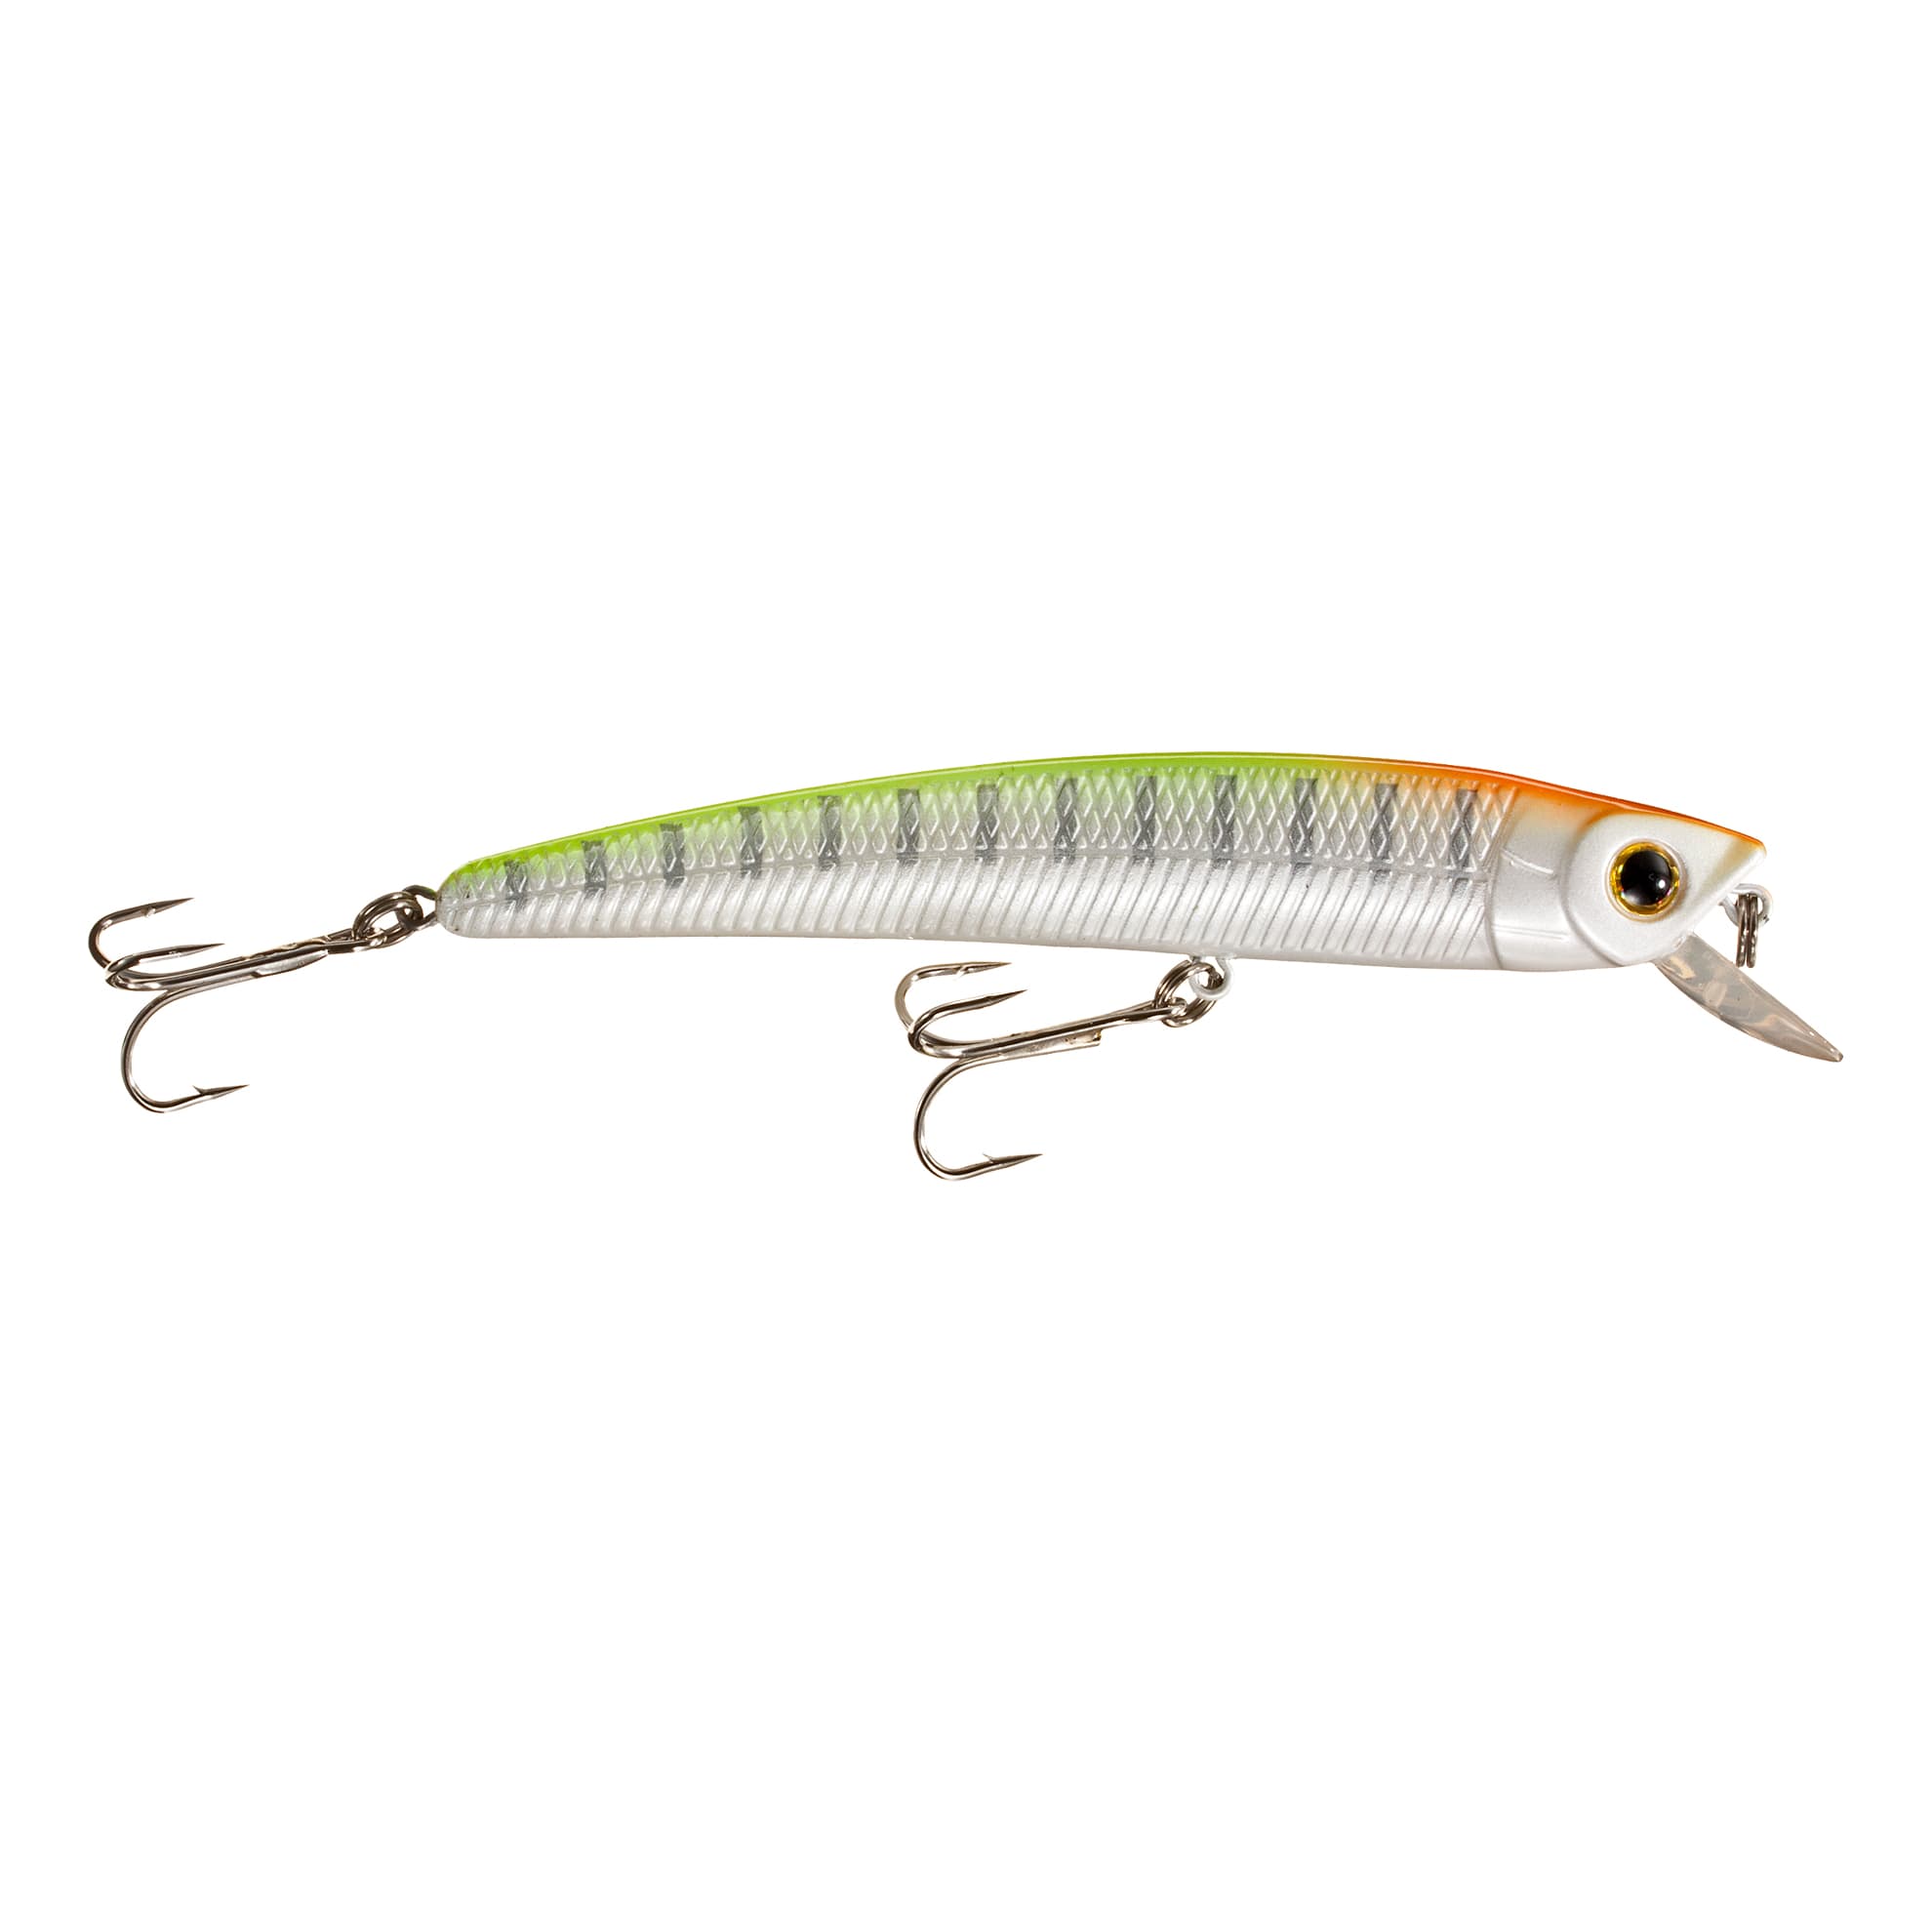 Bass Pro Shops® Tourney Special Minnow - Chartreuse/Orange Ghost Minnow